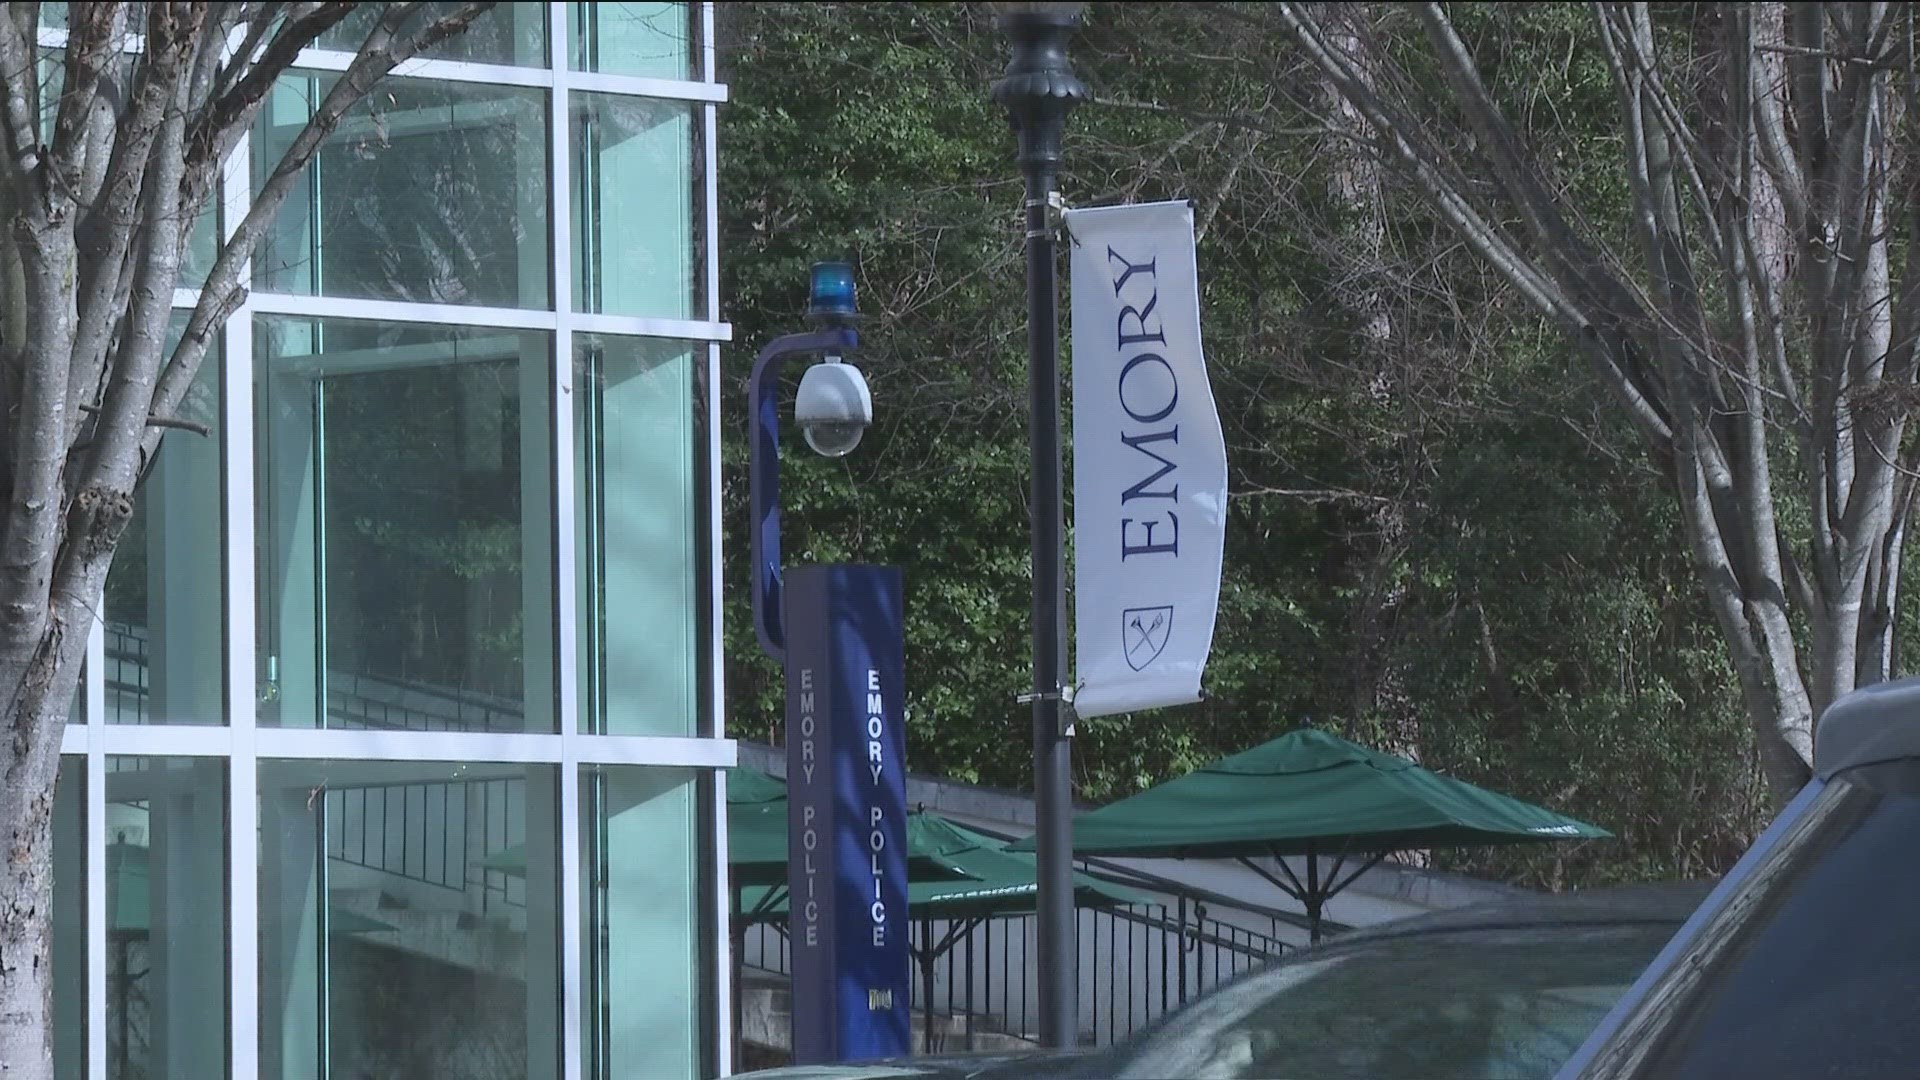 Since the war in the Gaza region broke out in early October, some members of Emory University's community say they've been targets of harassment and intimidation.